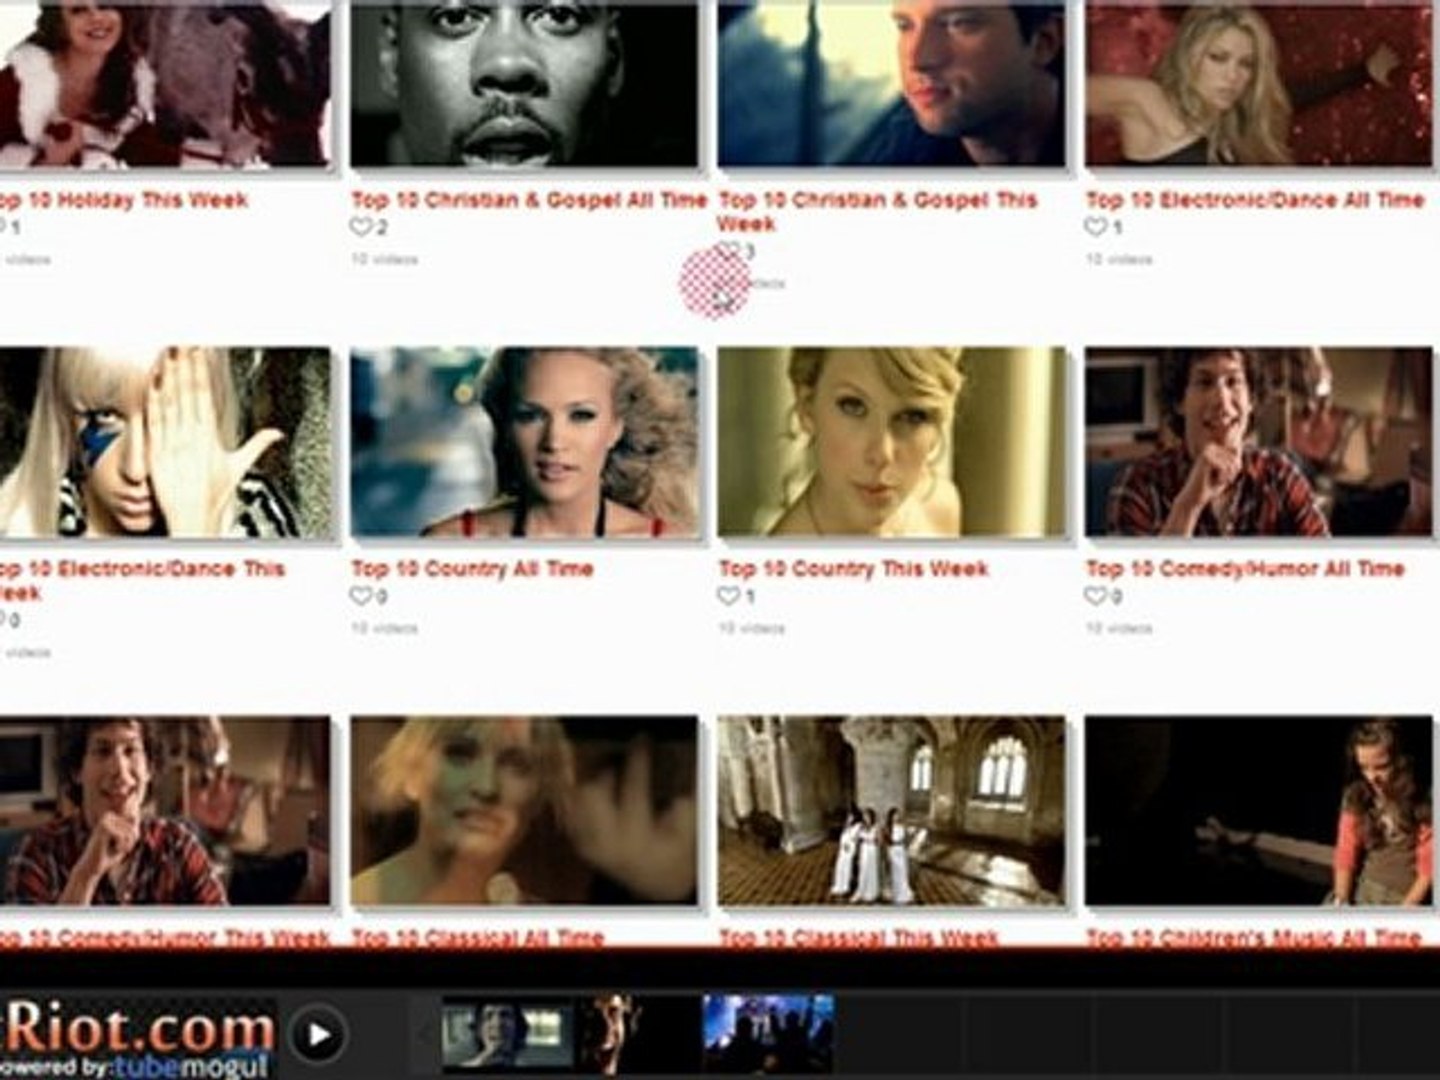 Vevo - How to find free official music videos with lyrics